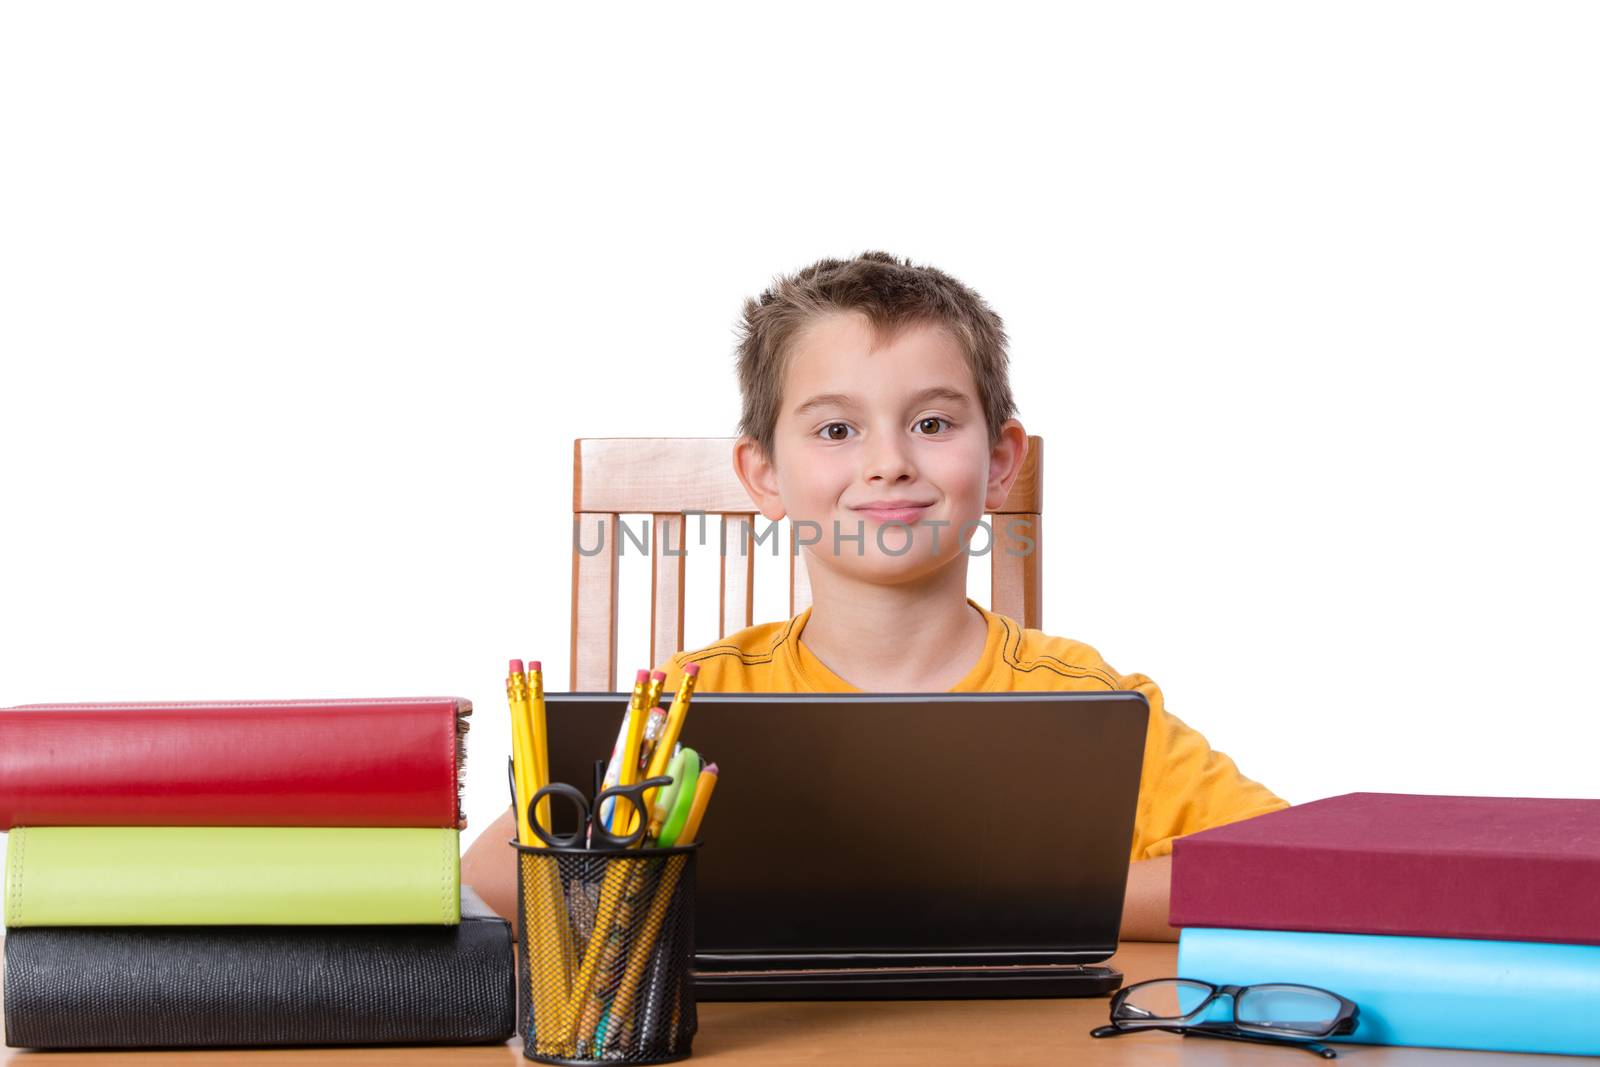 Smiling little boy at desk with laptop in between piles of large books and cup of pencils and pens